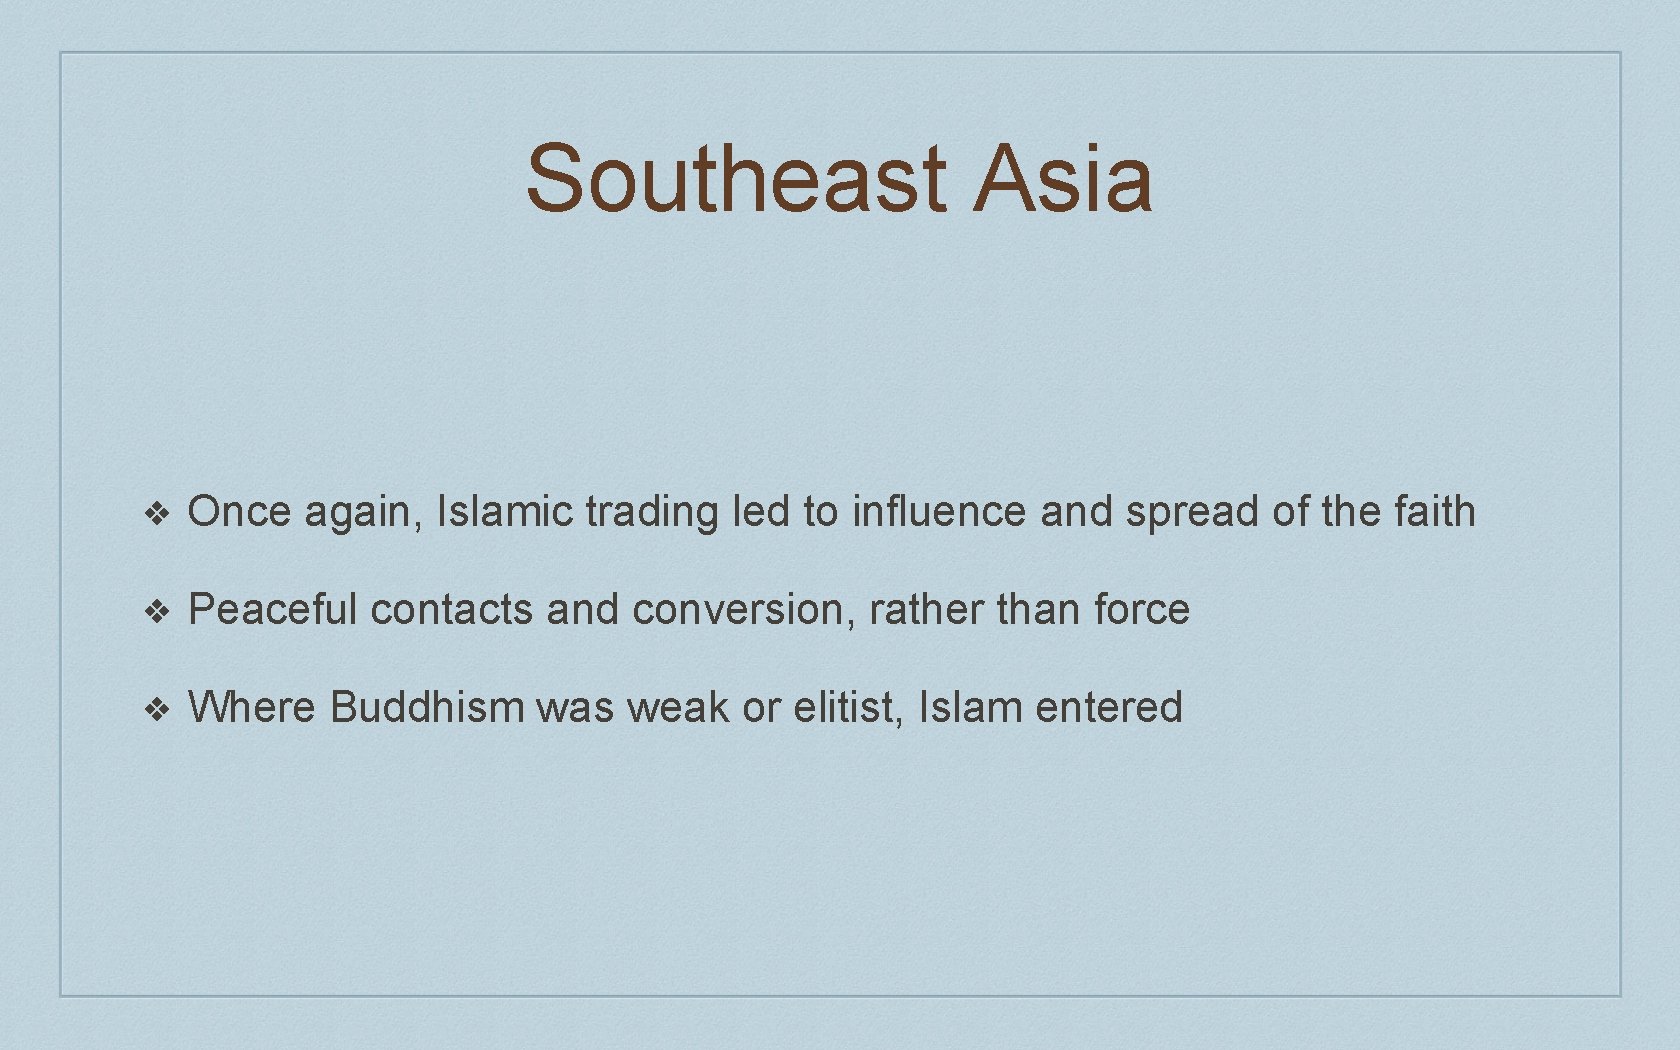 Southeast Asia ❖ Once again, Islamic trading led to influence and spread of the